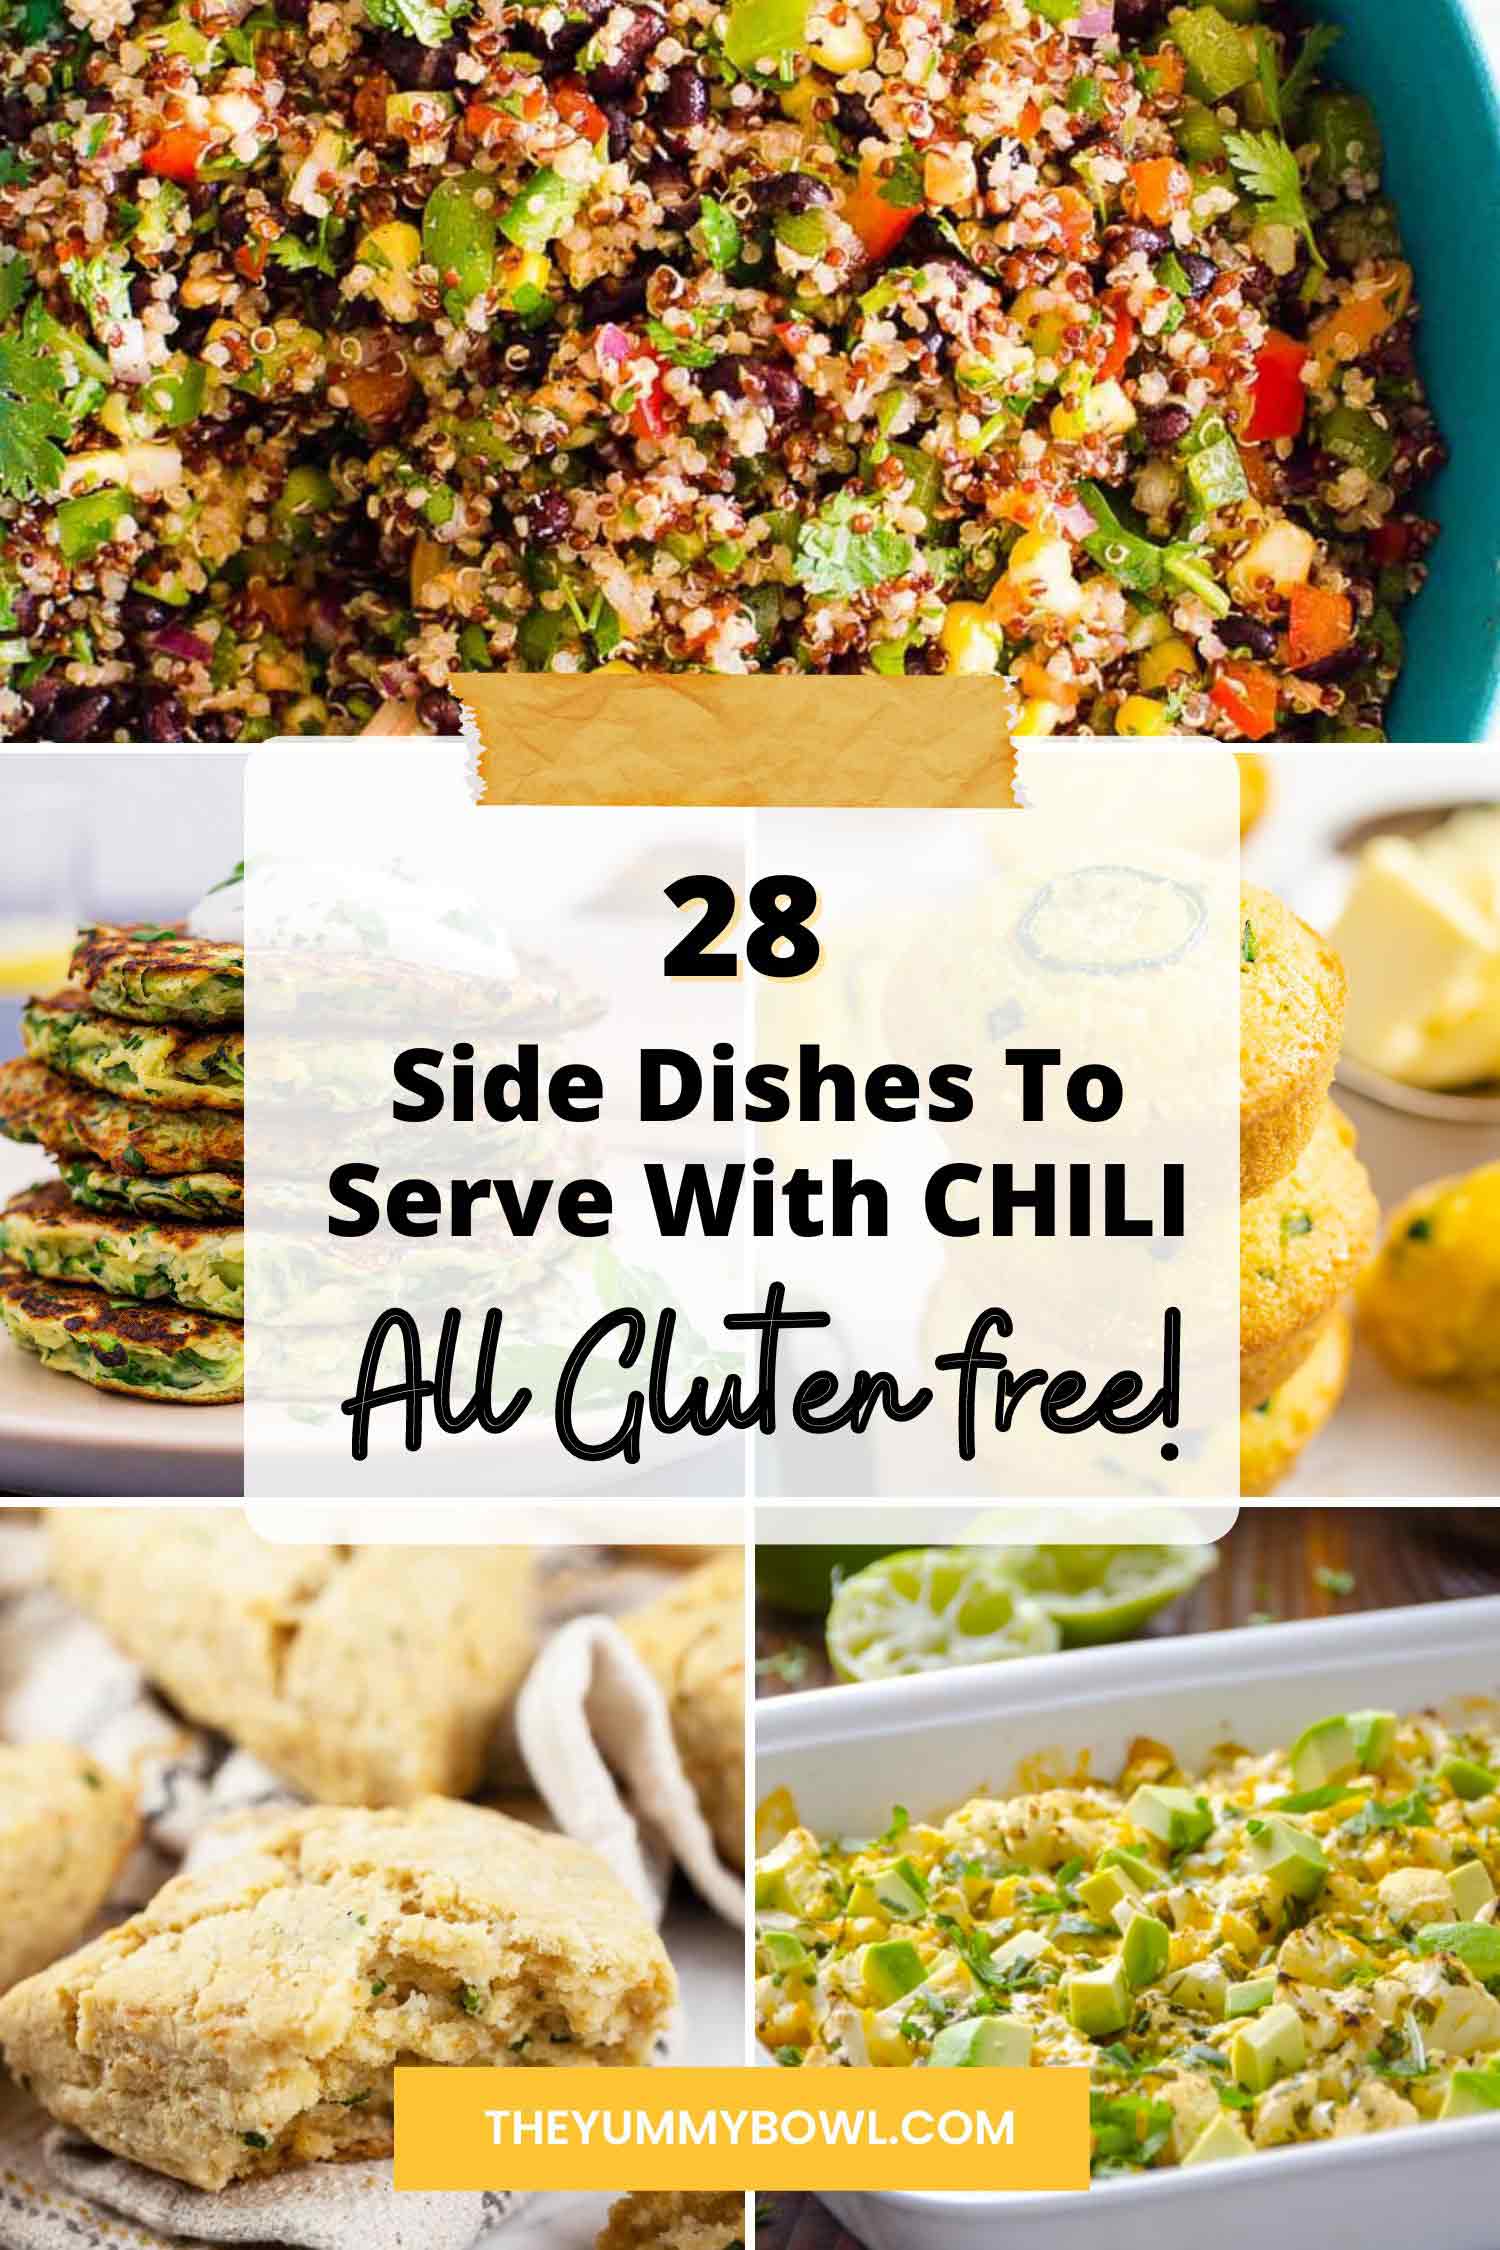 Side Dishes To Serve With Chili collage of pictures